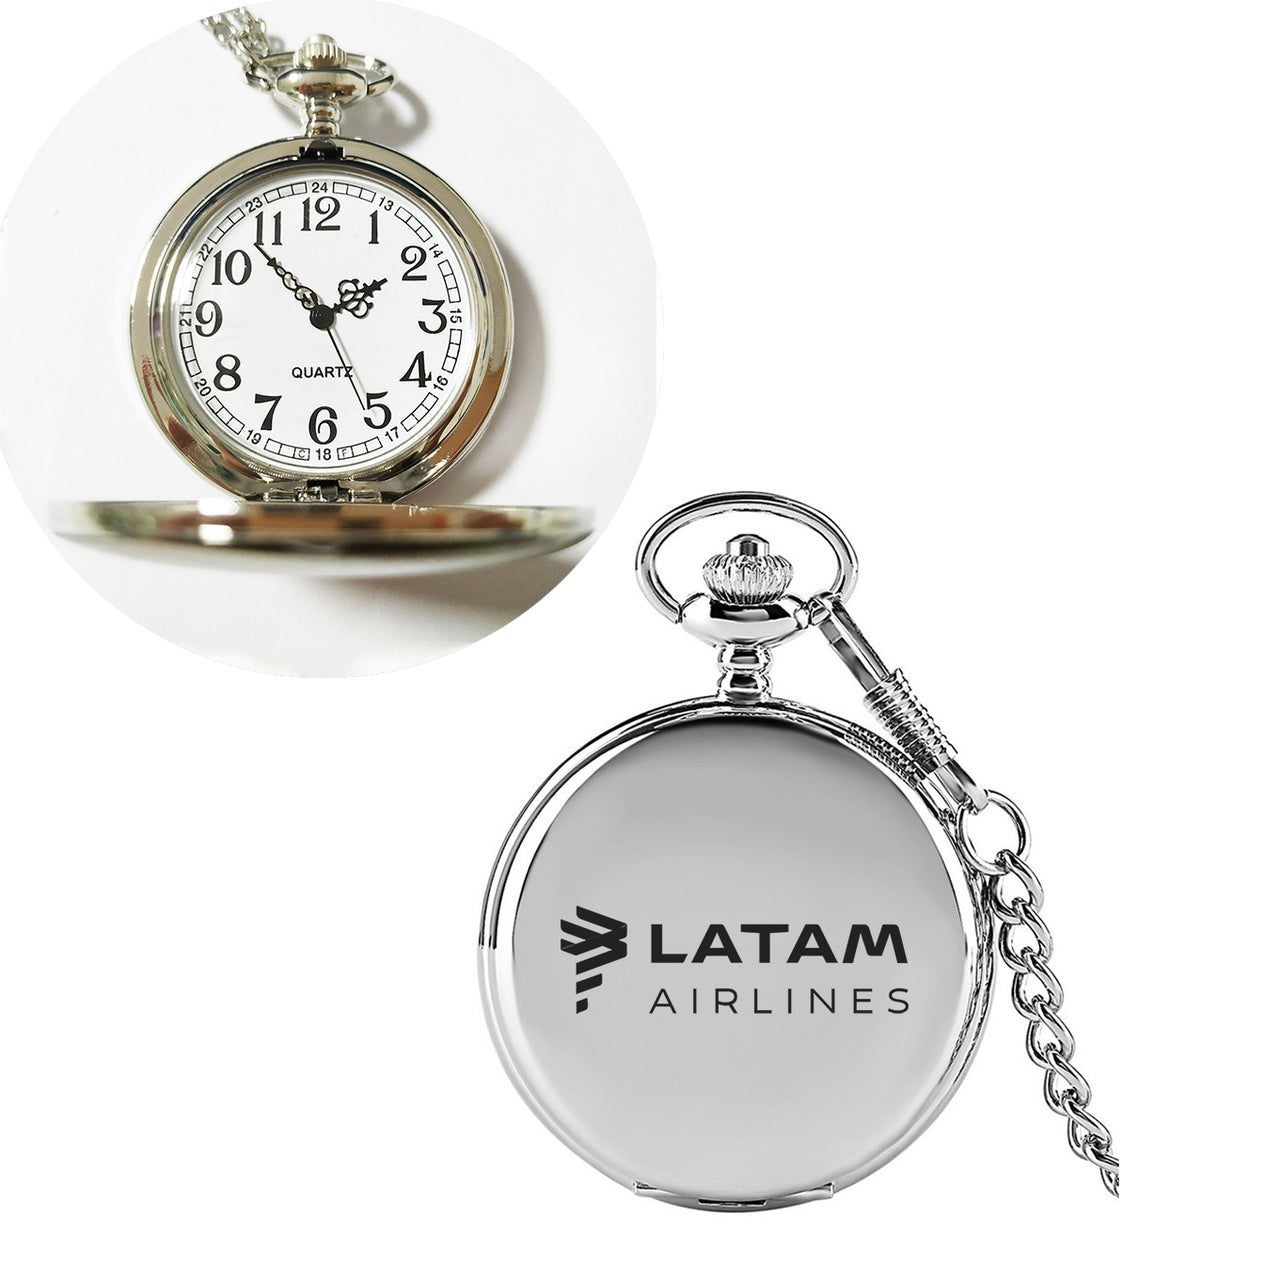 LATAM Airlines Designed Pocket Watches